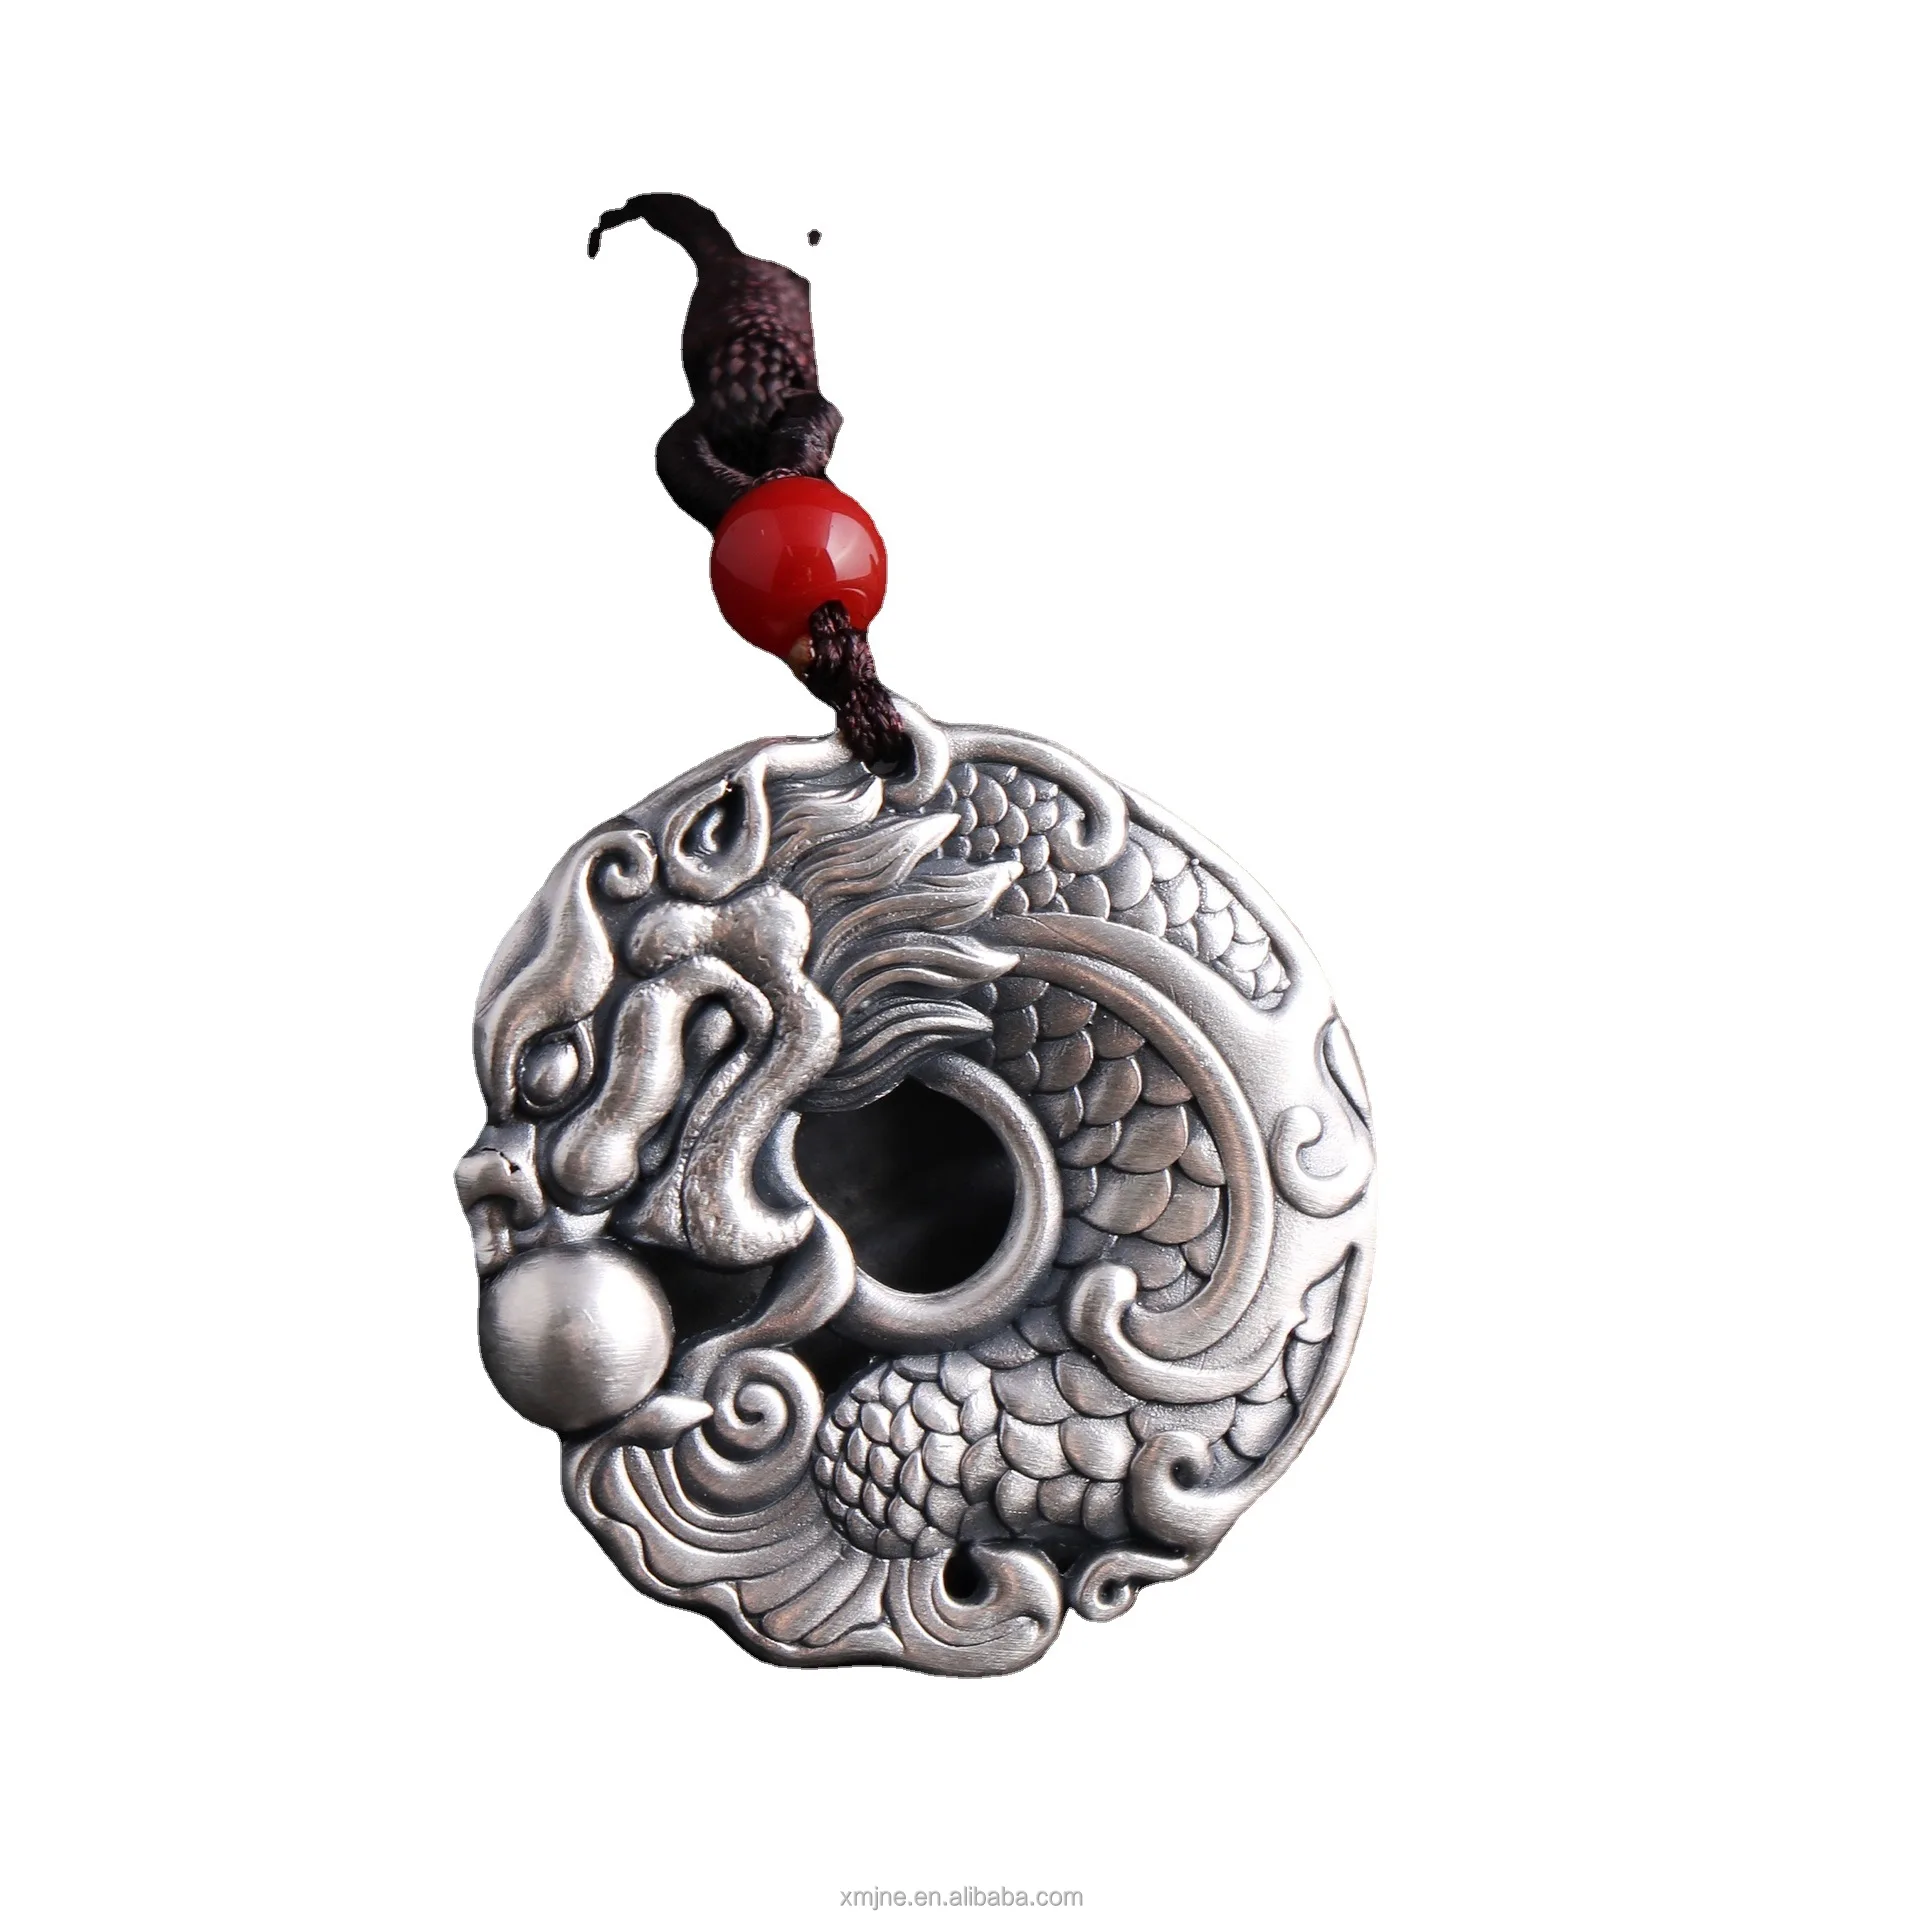 

Certified S999 Vintage Stereoscopic Dragon Pendant Strength Style Personalized Dragon And Peace Necklace Men's Pendant